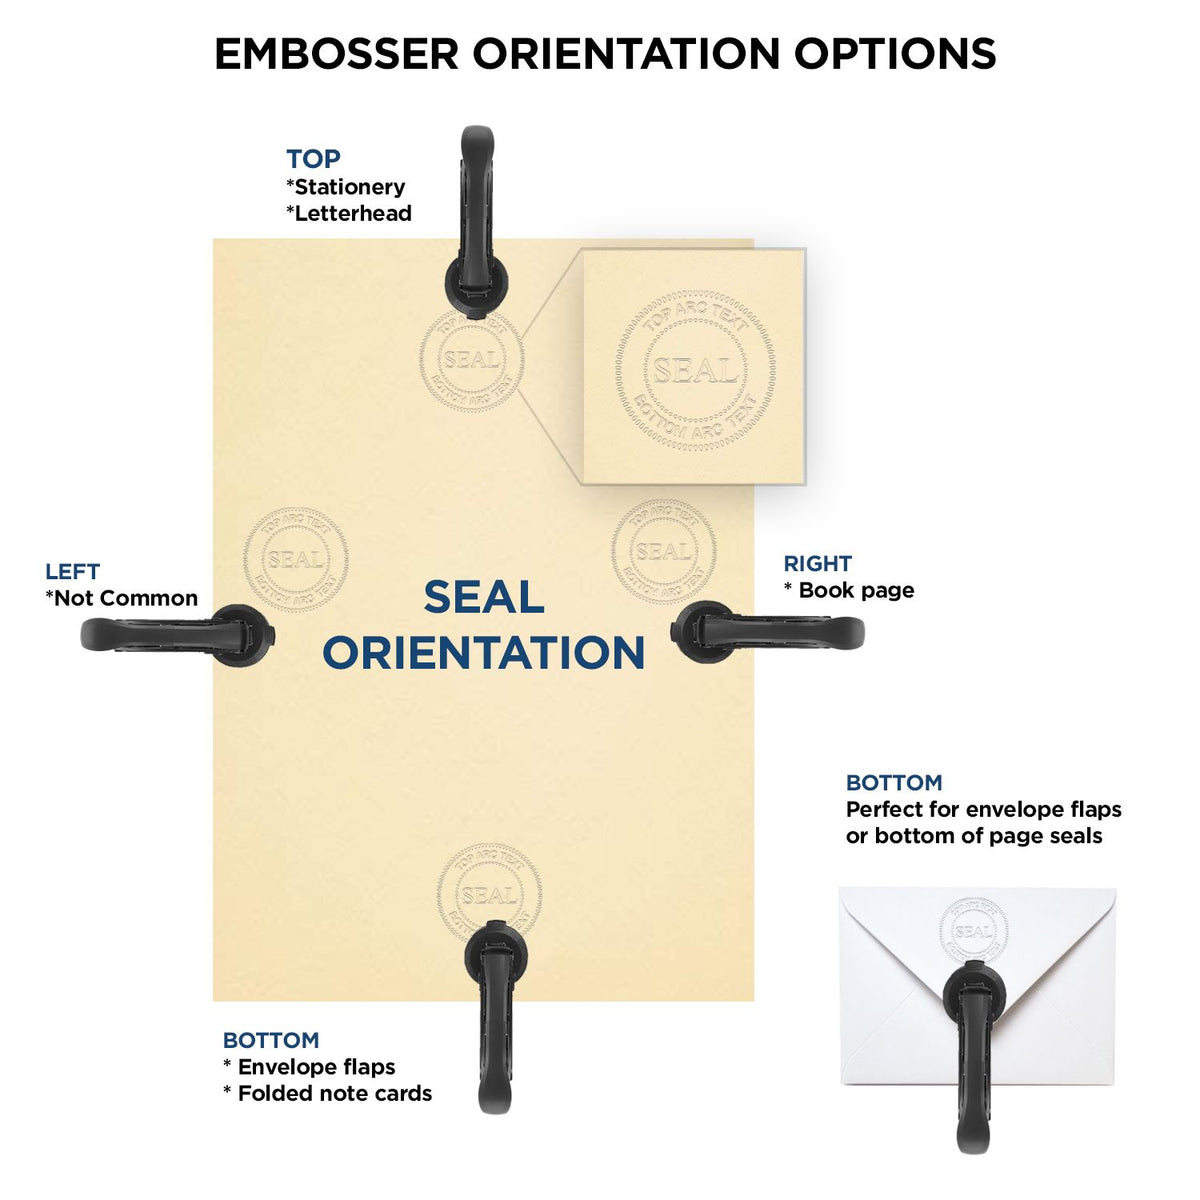 An infographic for the Handheld Tennessee Professional Engineer Embosser showing embosser orientation, this is showing examples of a top, bottom, right and left insert.